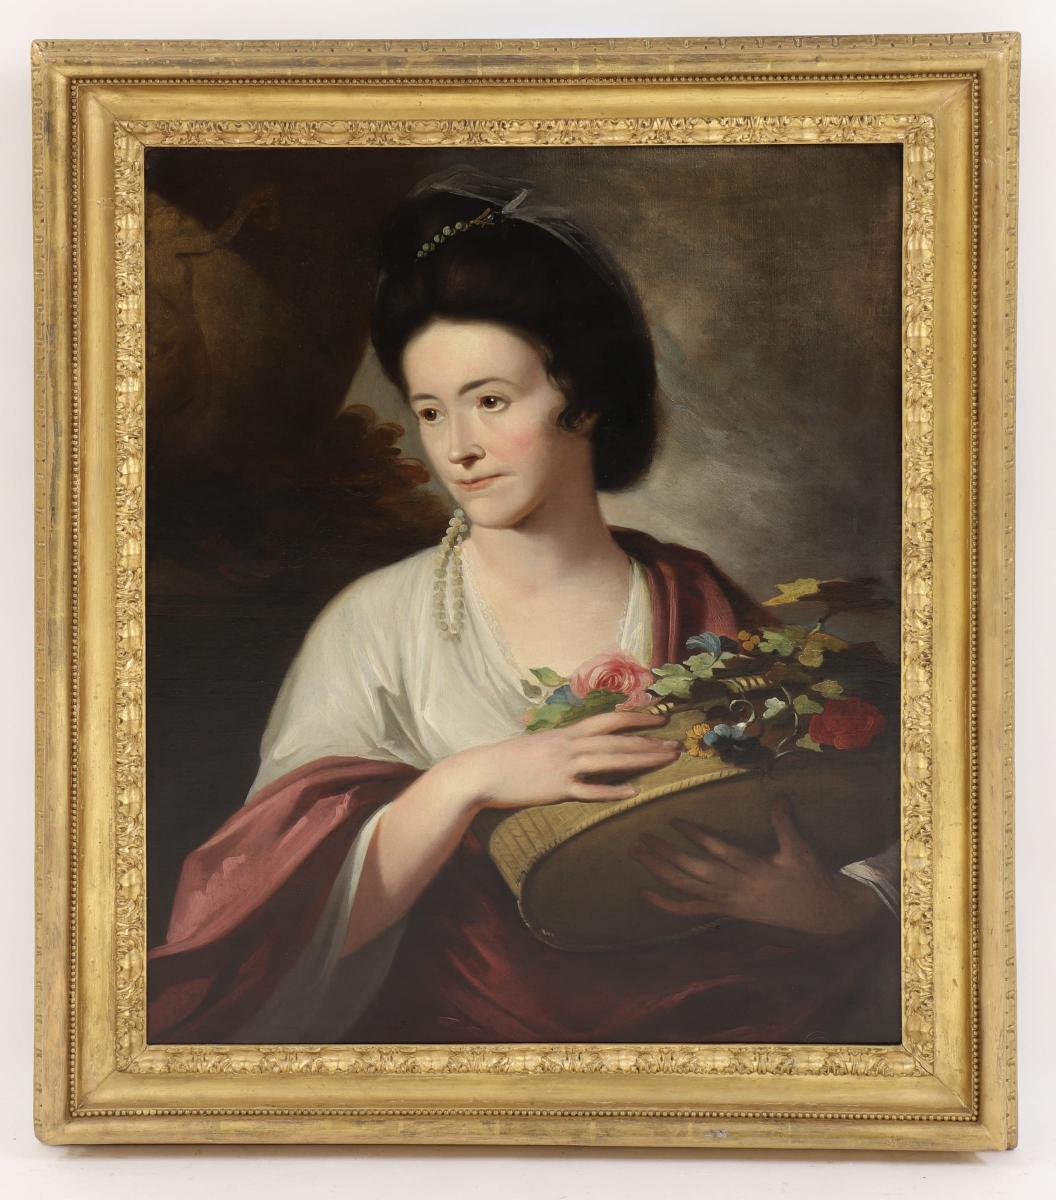 Tilly Kettle (1735-1786), Portrait of a lady